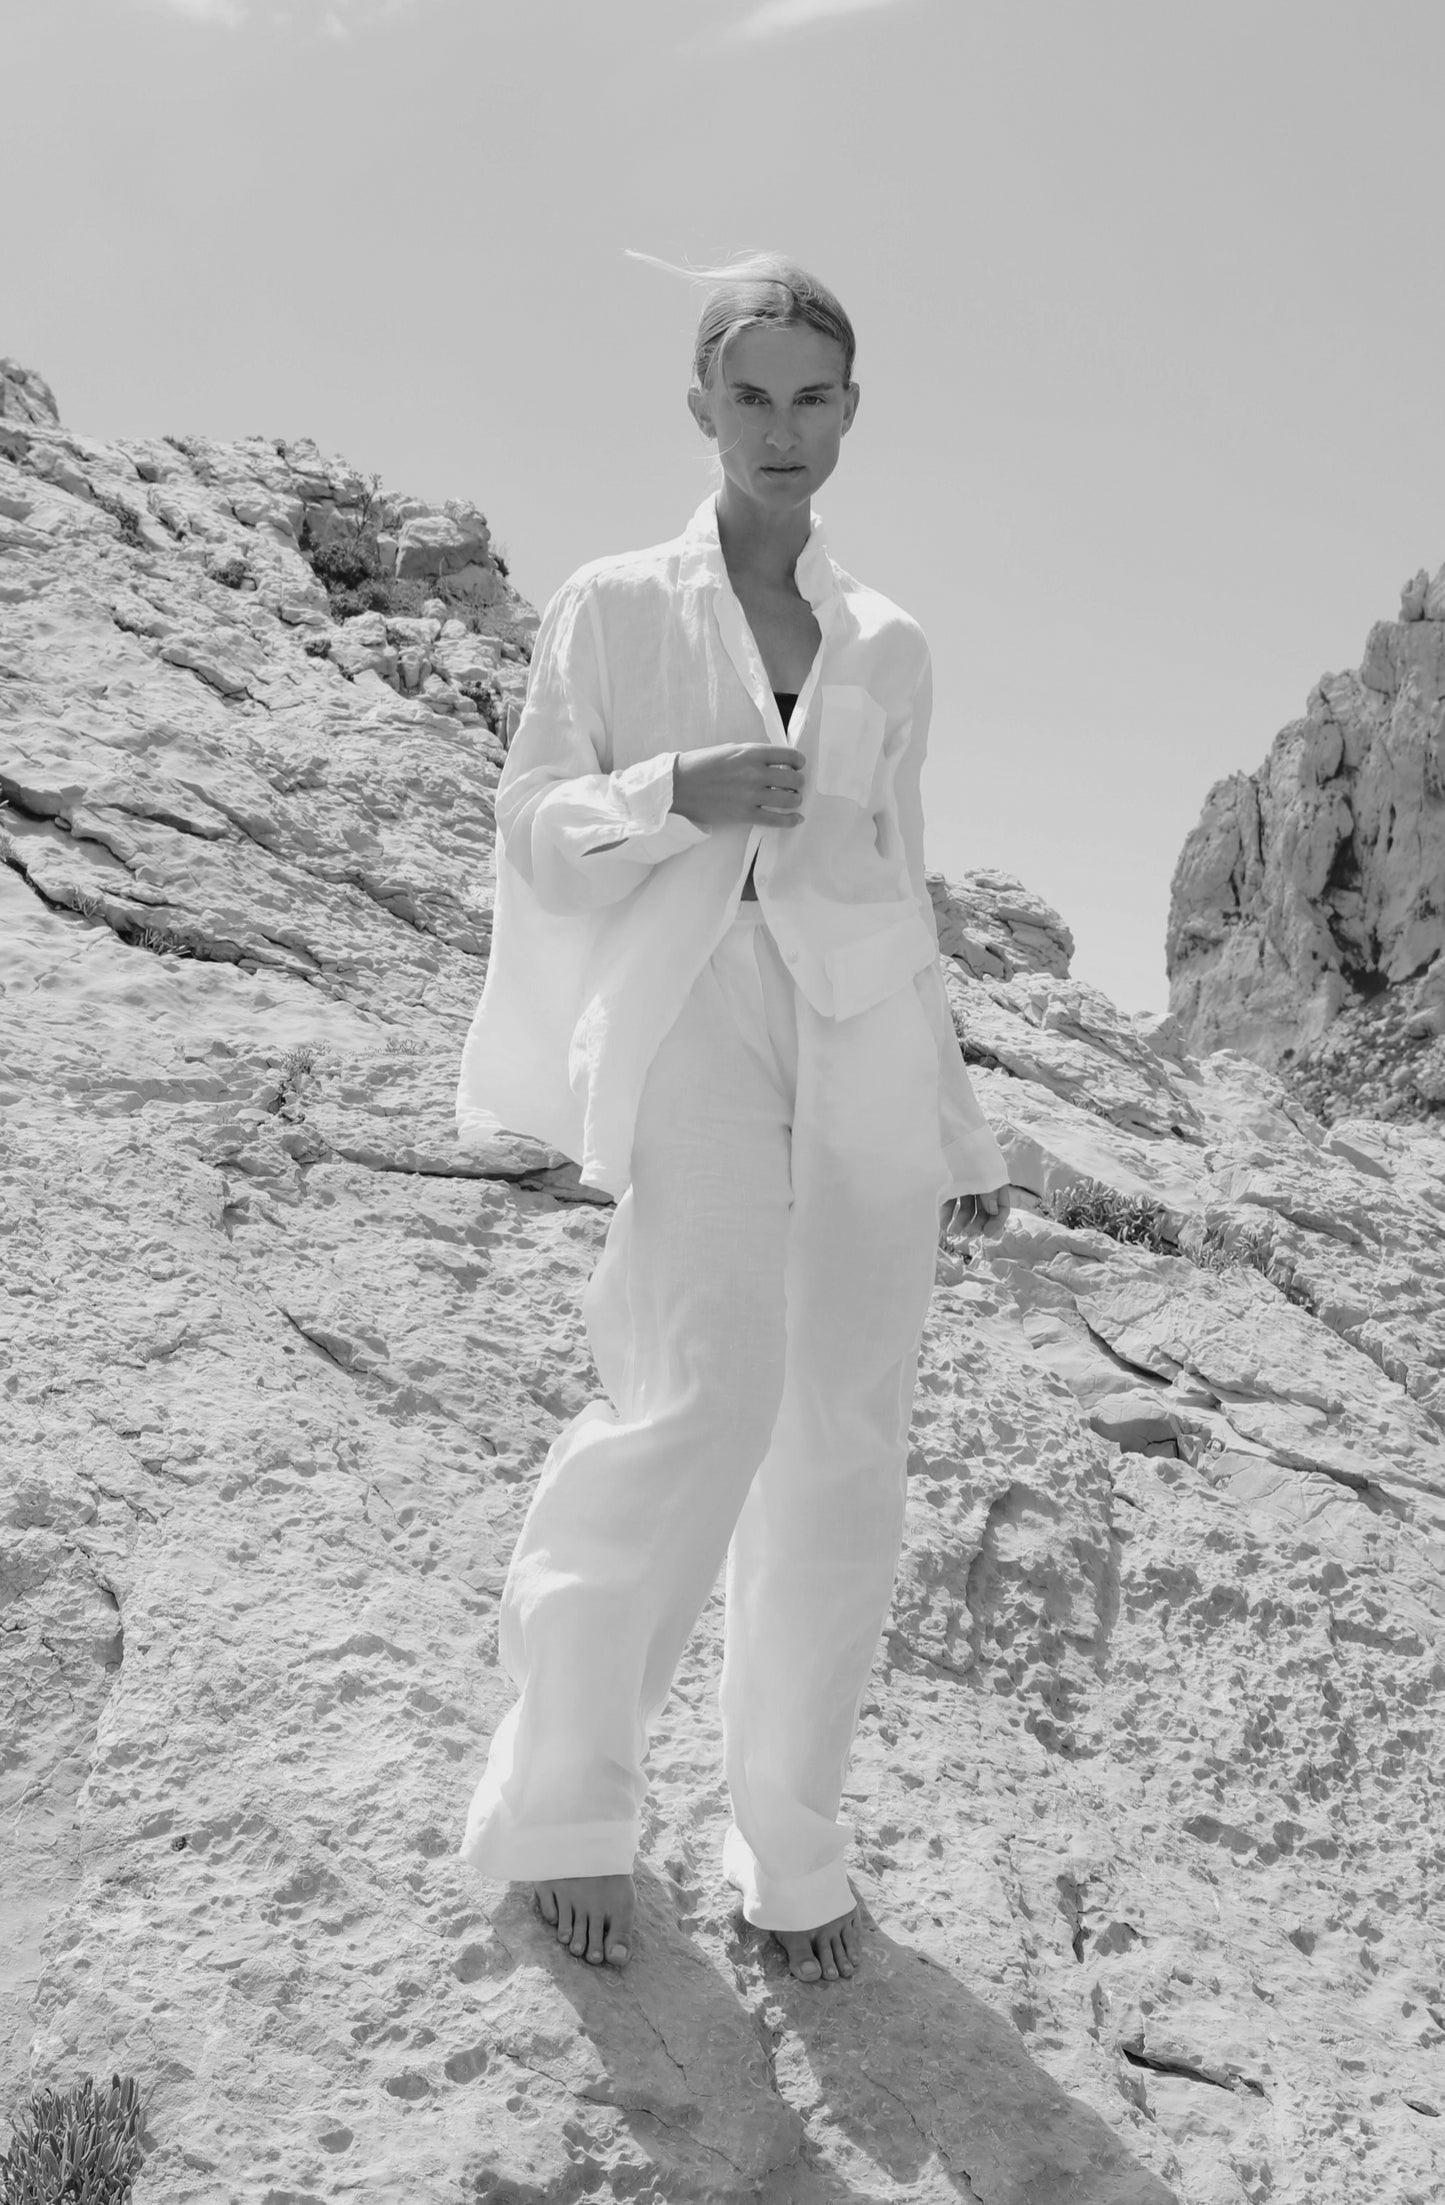 Description: A woman in a white suit, wearing Velvet by Jenny Graham's PICO PANT, soft linen pants with an elastic waistband, standing on a rock.-26829926334657